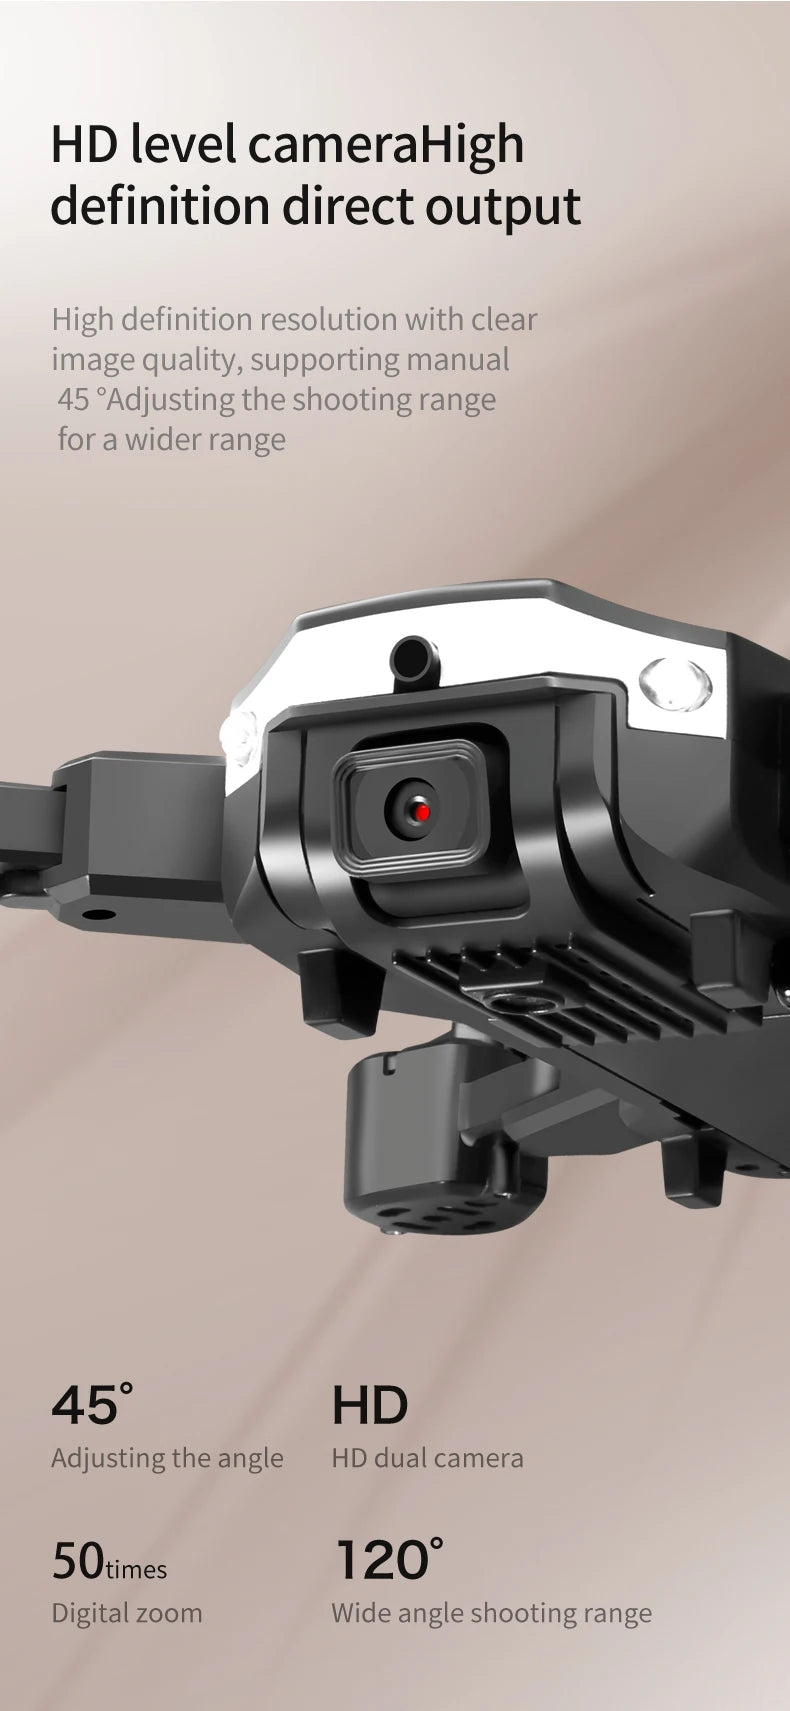 T6 Drone, Adjusting the shooting range for a wider range 45 HD Dual camera 5Otimes 12